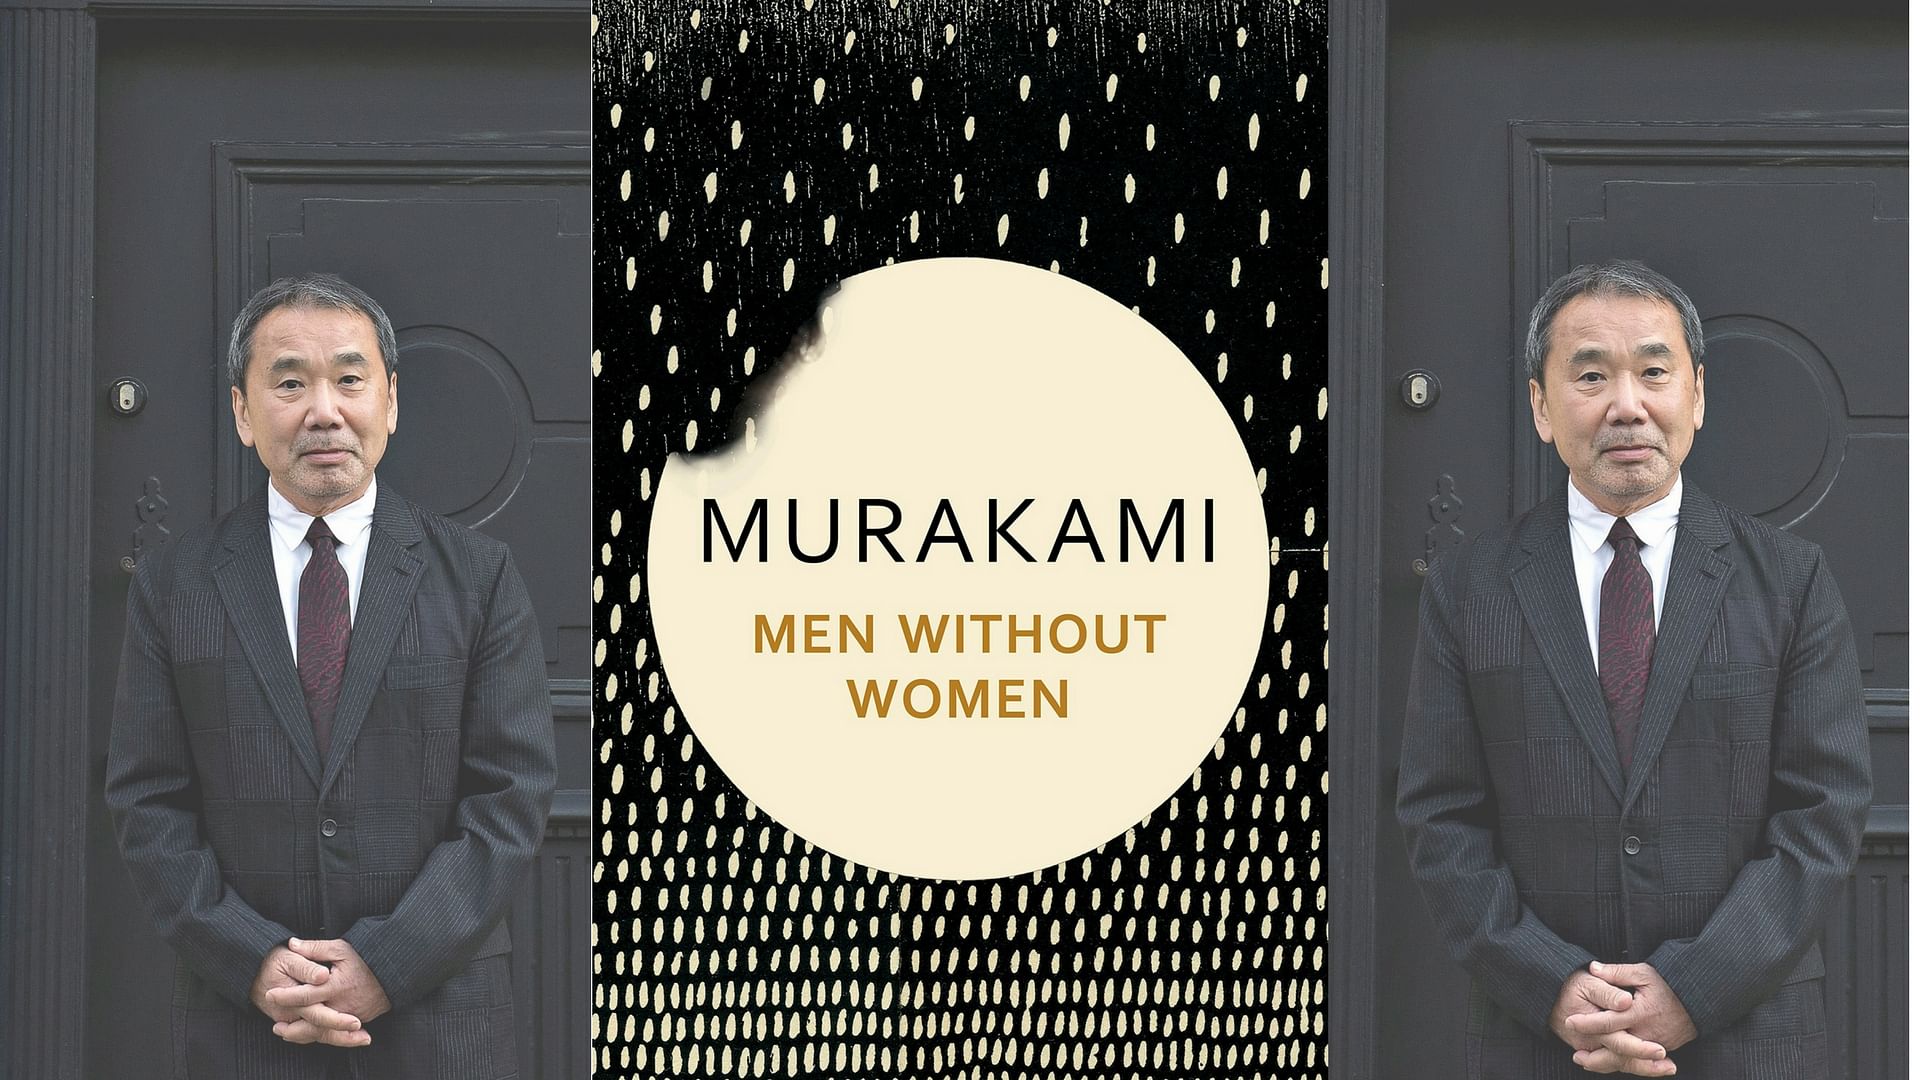 Haruki Murakami’s latest book, <i>Men Without Women,</i> is a collection of short stories.